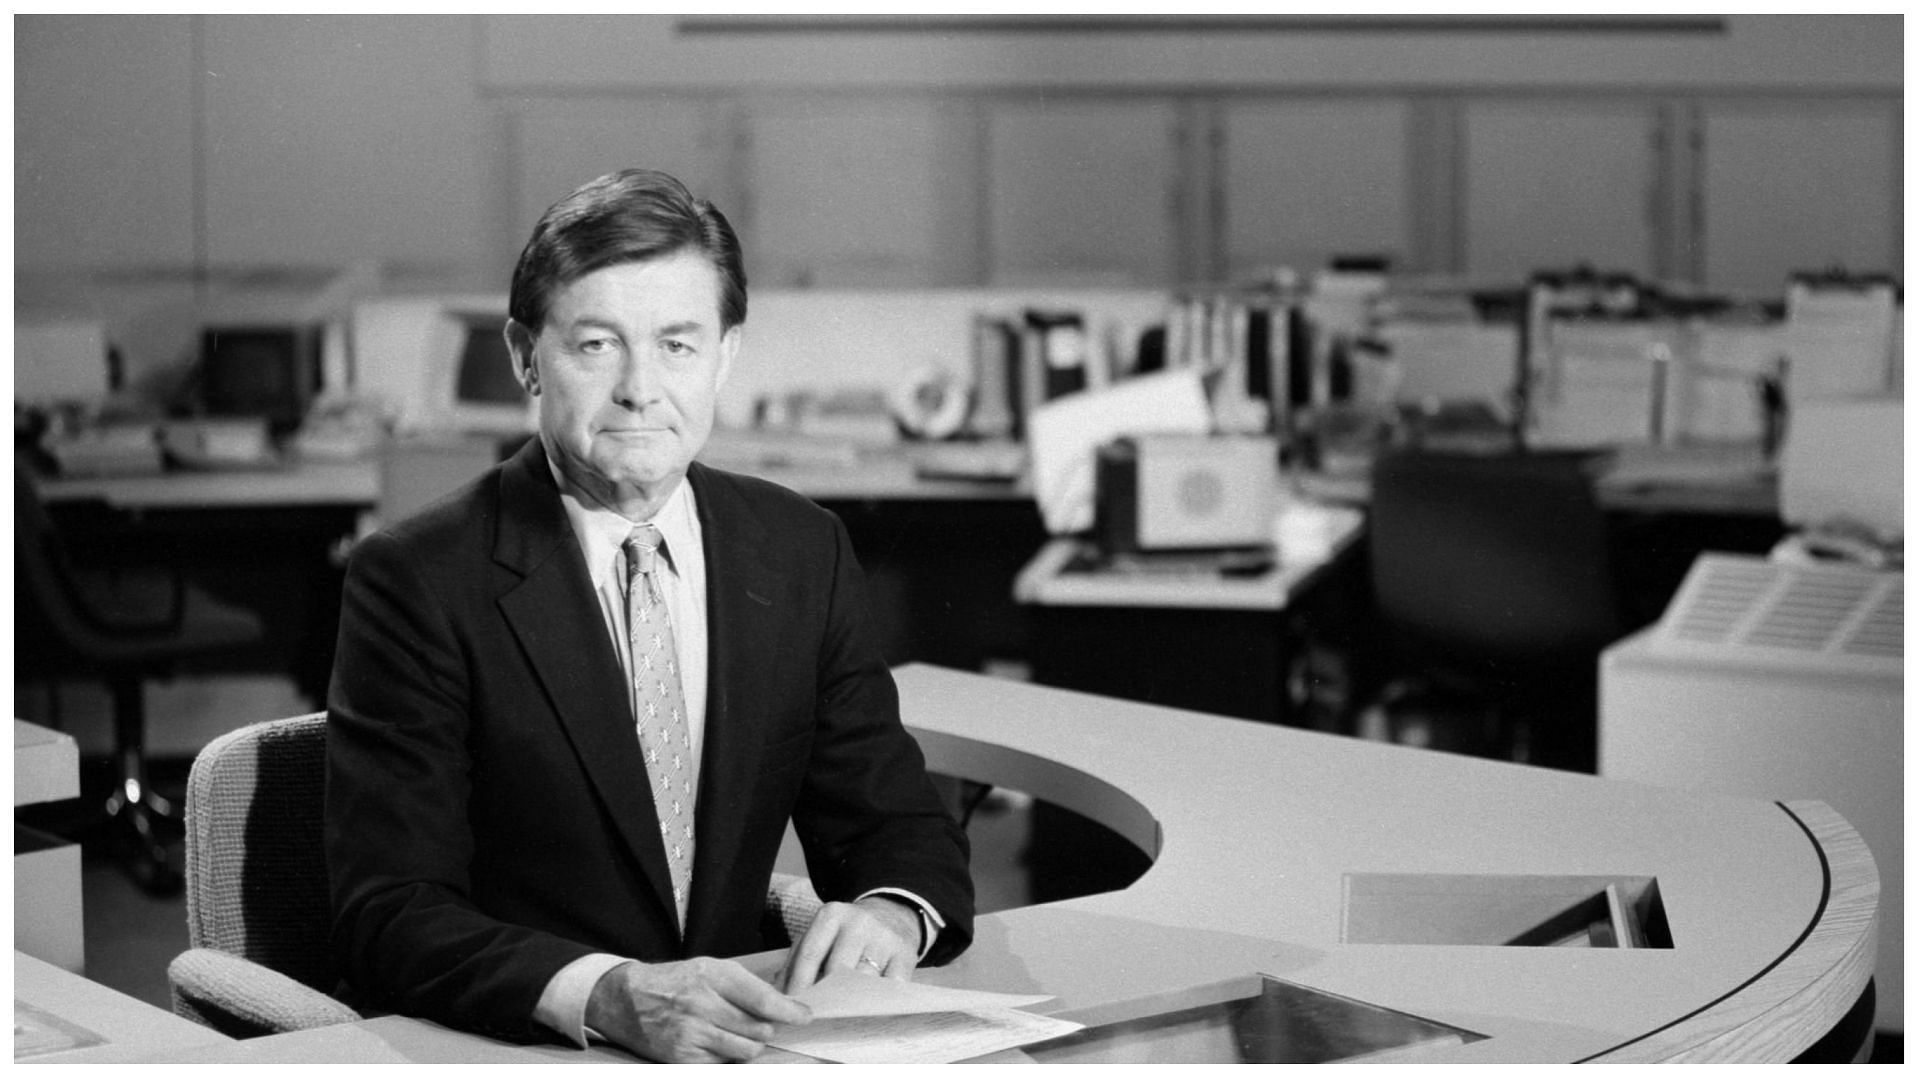 Bill Plante was a popular journalist and correspondent for CBS News (Image via CBS/Getty Images)